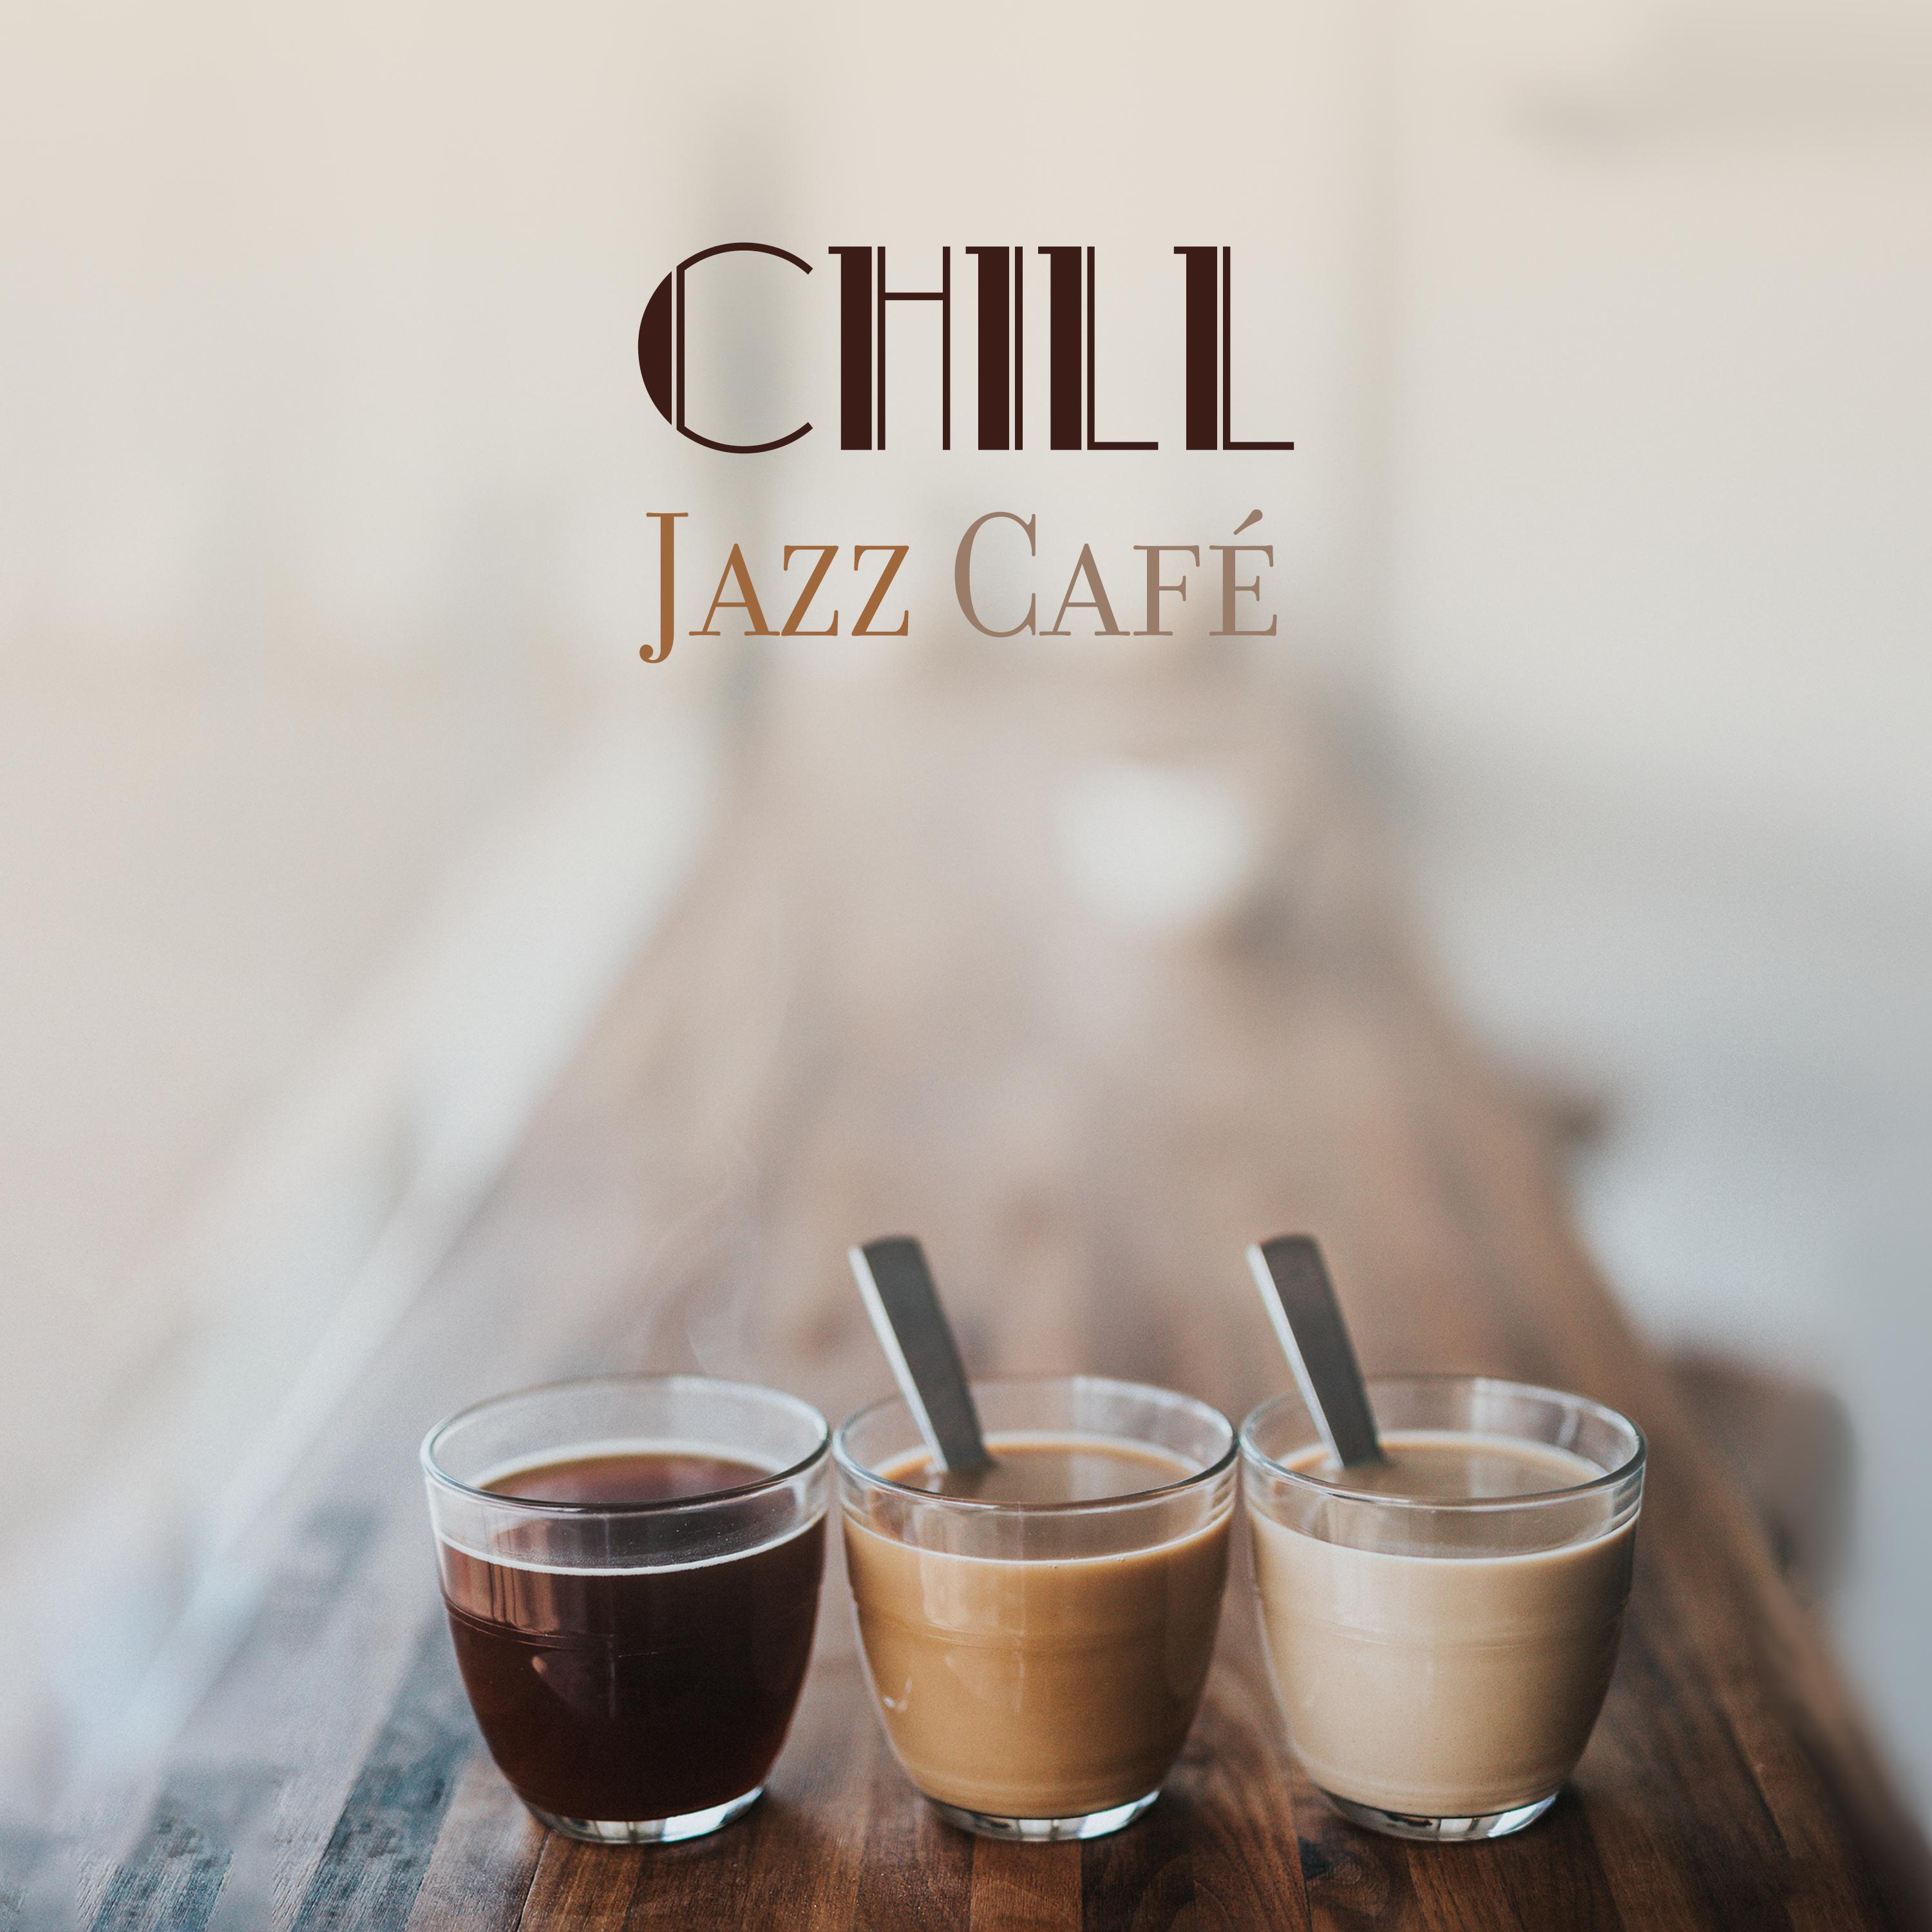 Chill Jazz Cafe Calming Piano Instrumental Music, Background Cafe Sounds